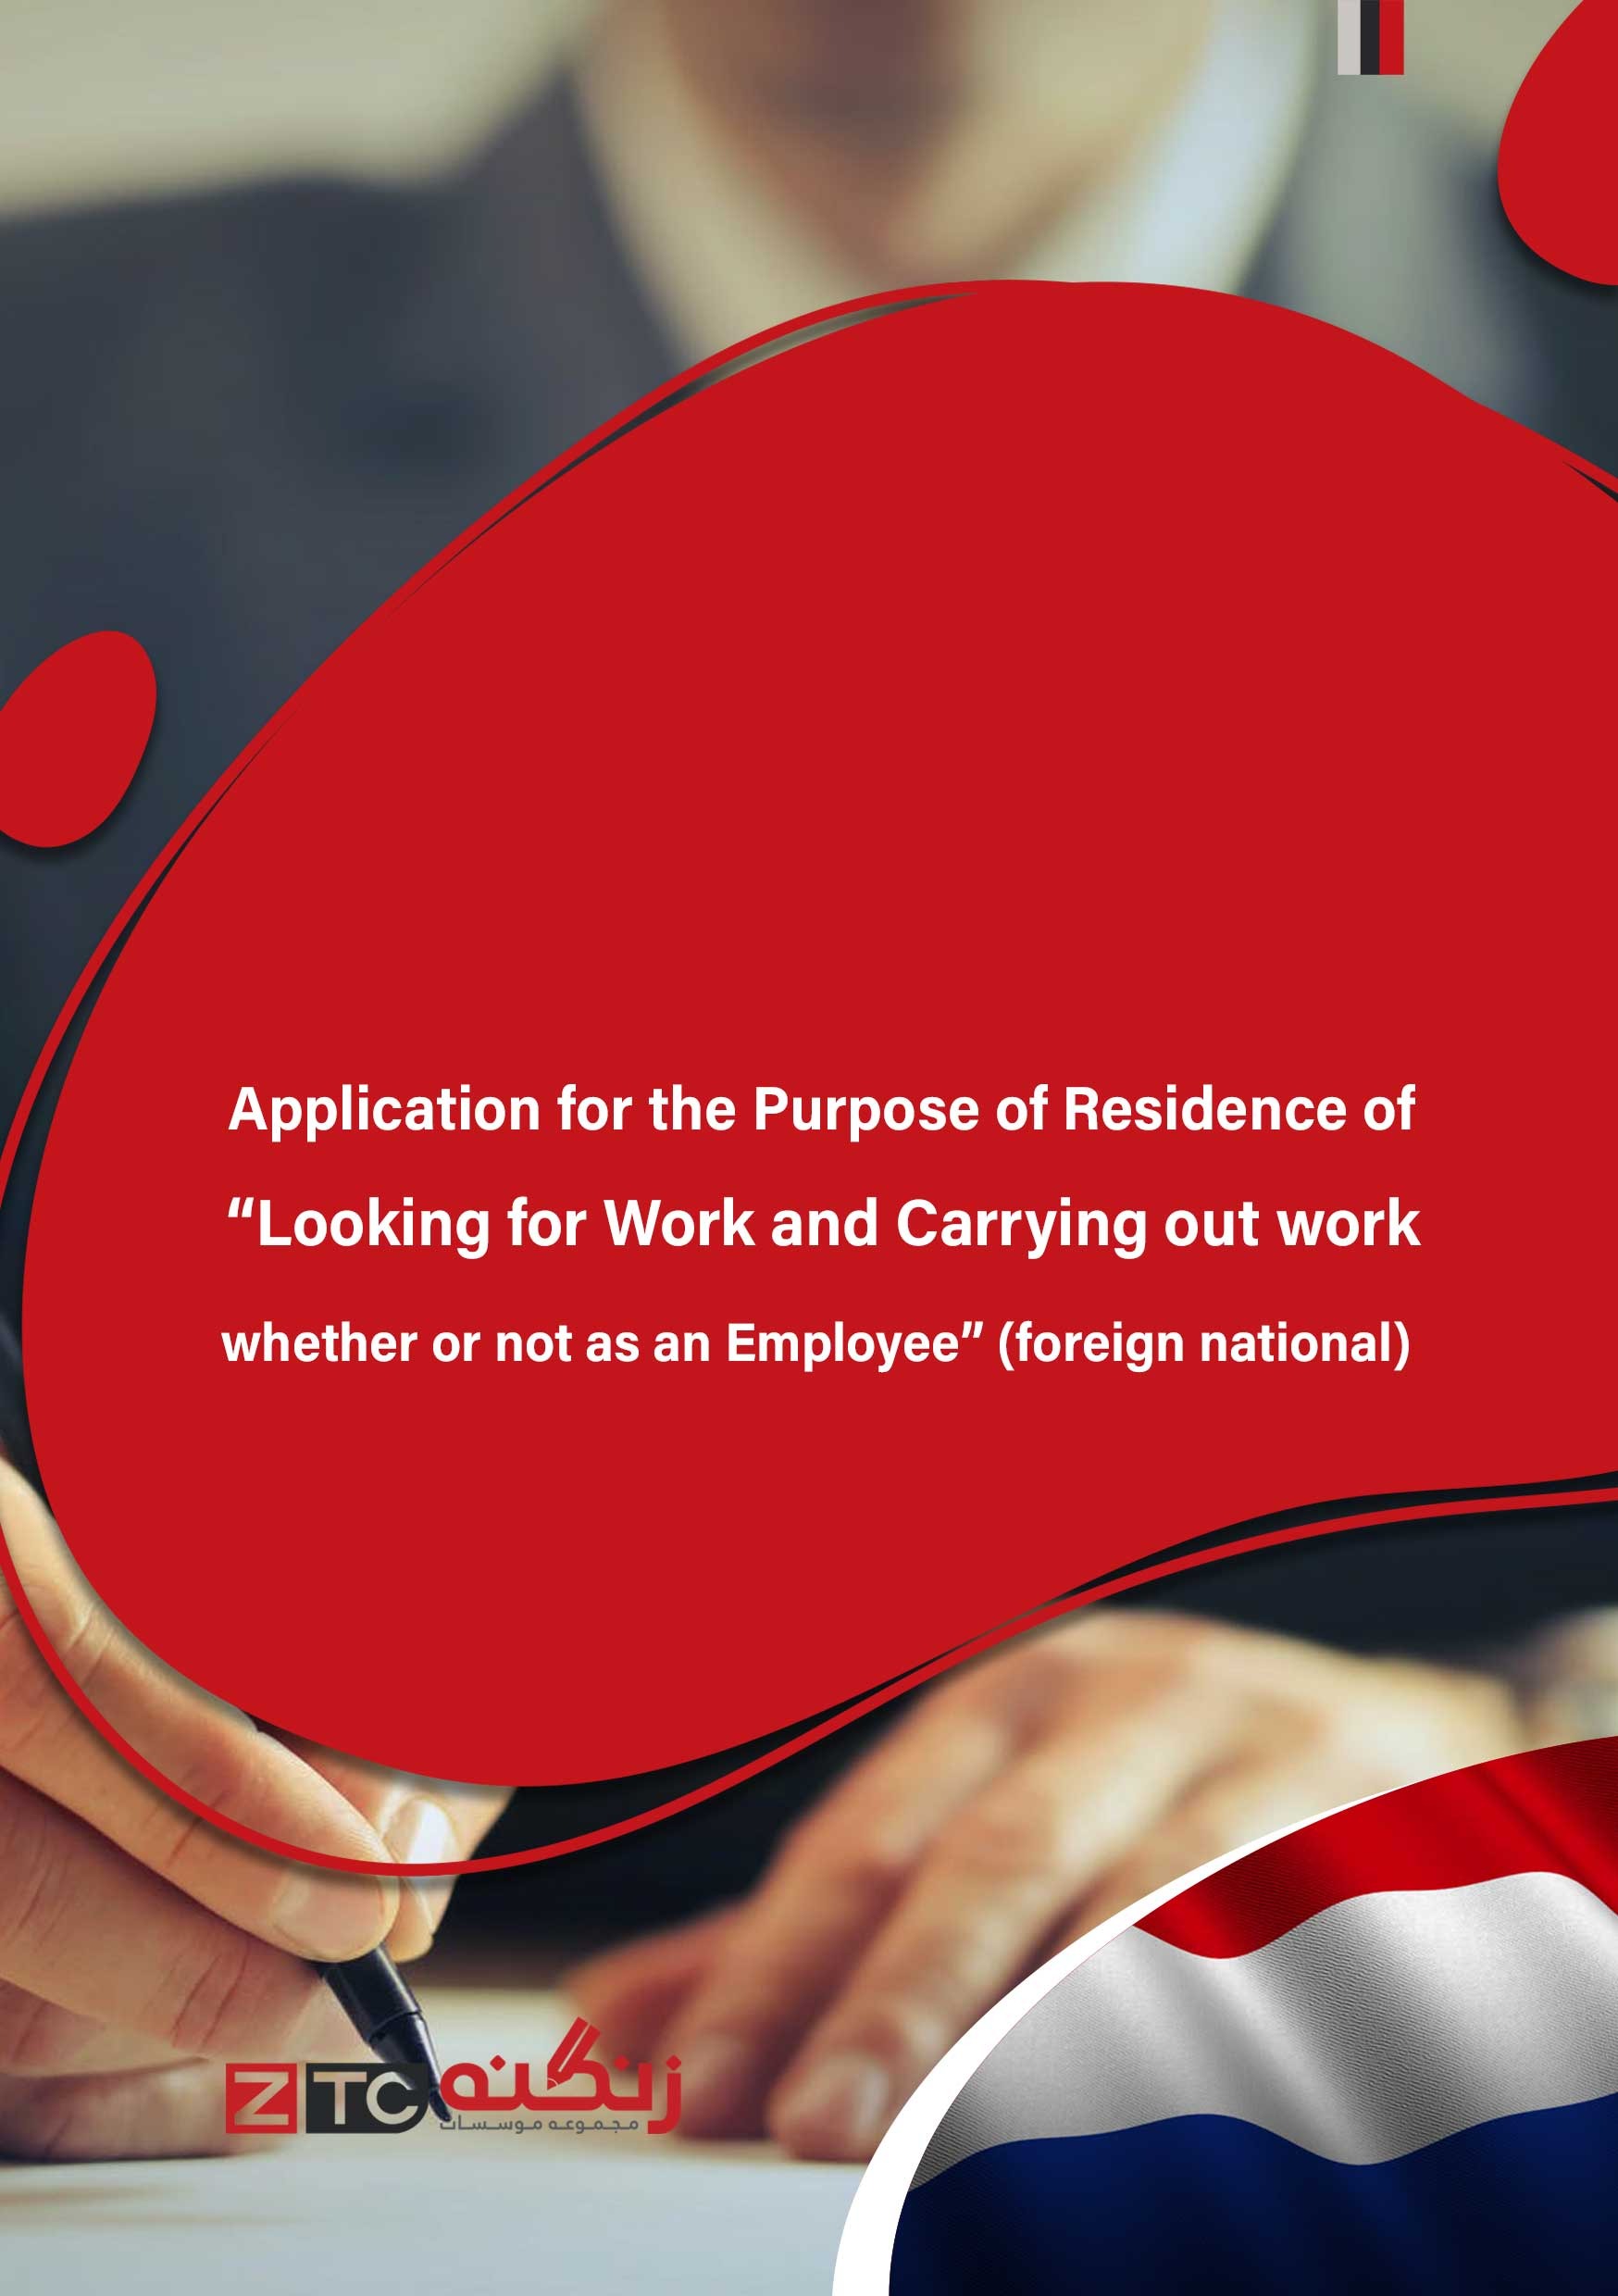 Application for the Purpose of Residence of “Looking for Work and Carrying out work whether or not as an Employee” (foreign national)